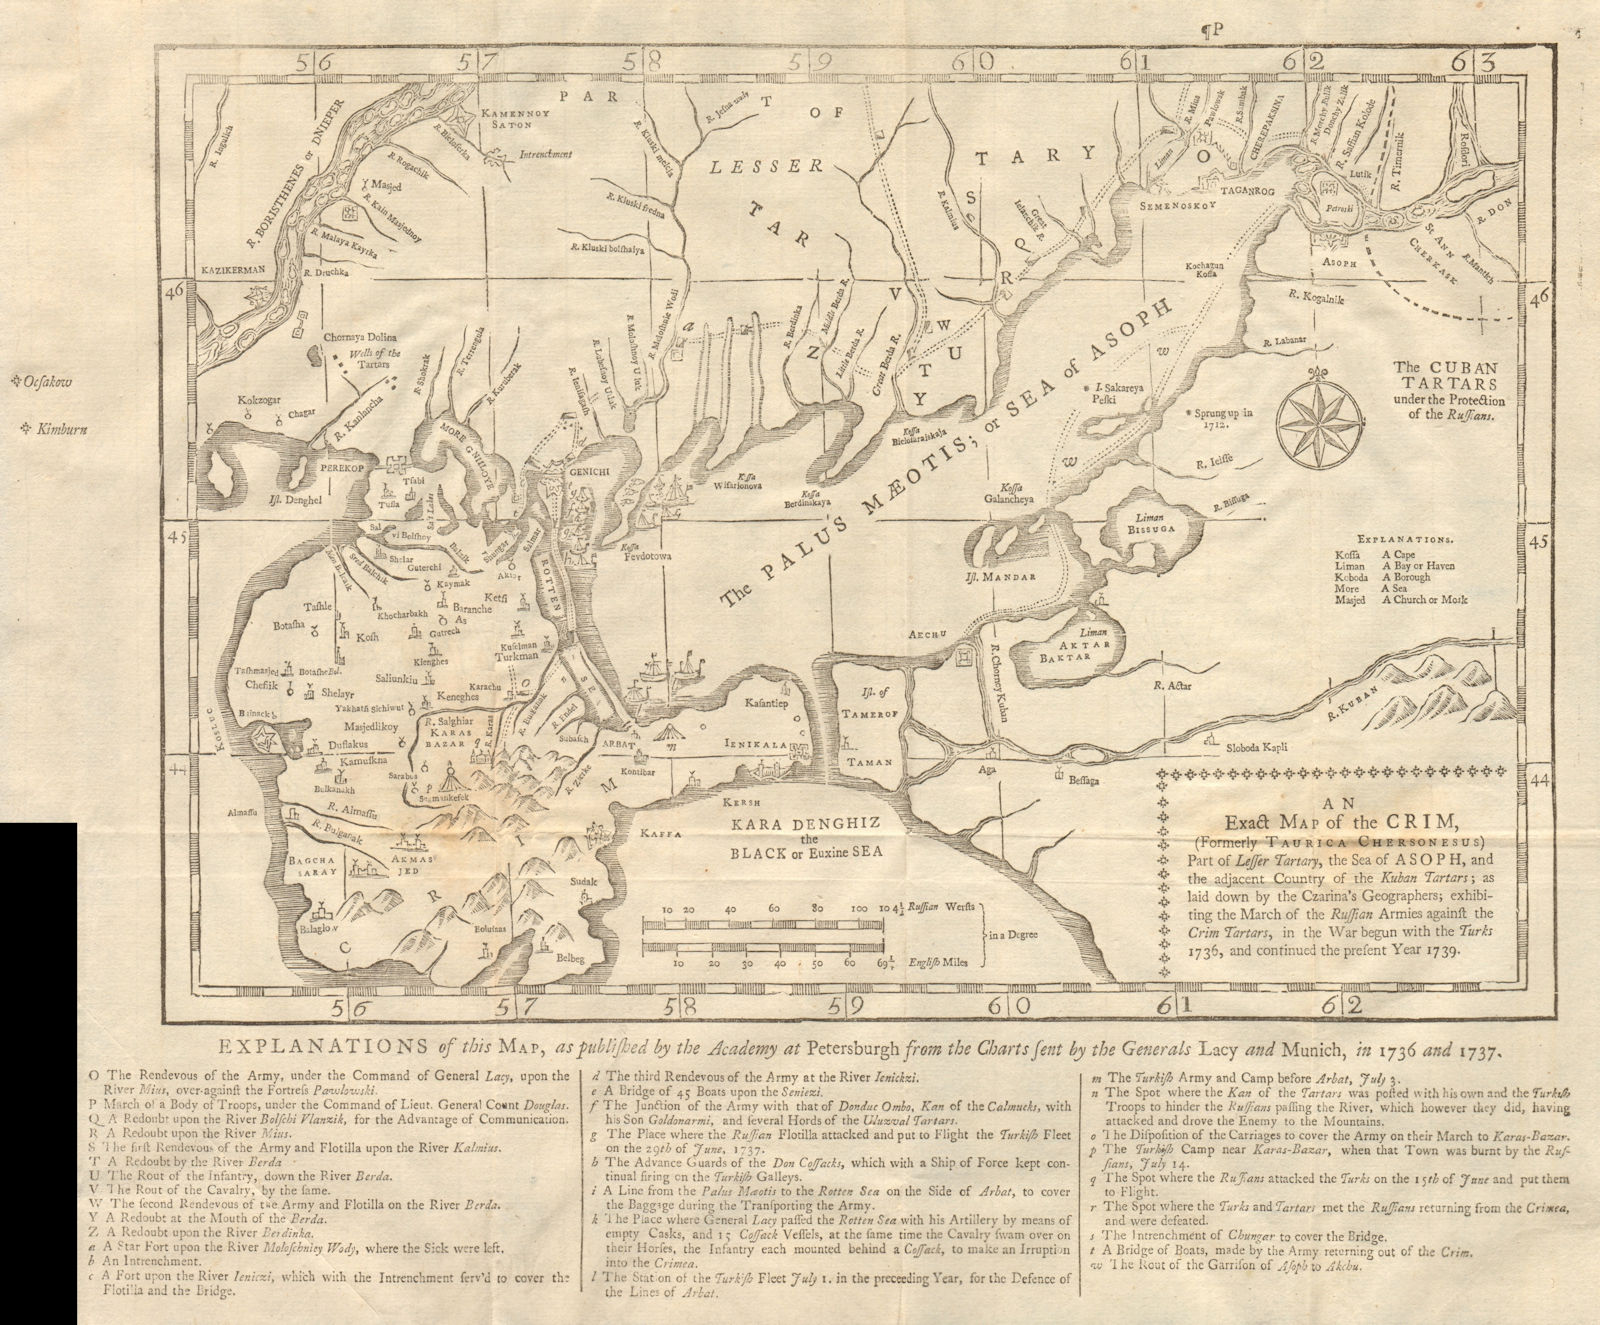 Associate Product An exact map of the Crim formerly Taurica Chersonesus. Crimea GENTS MAG 1739